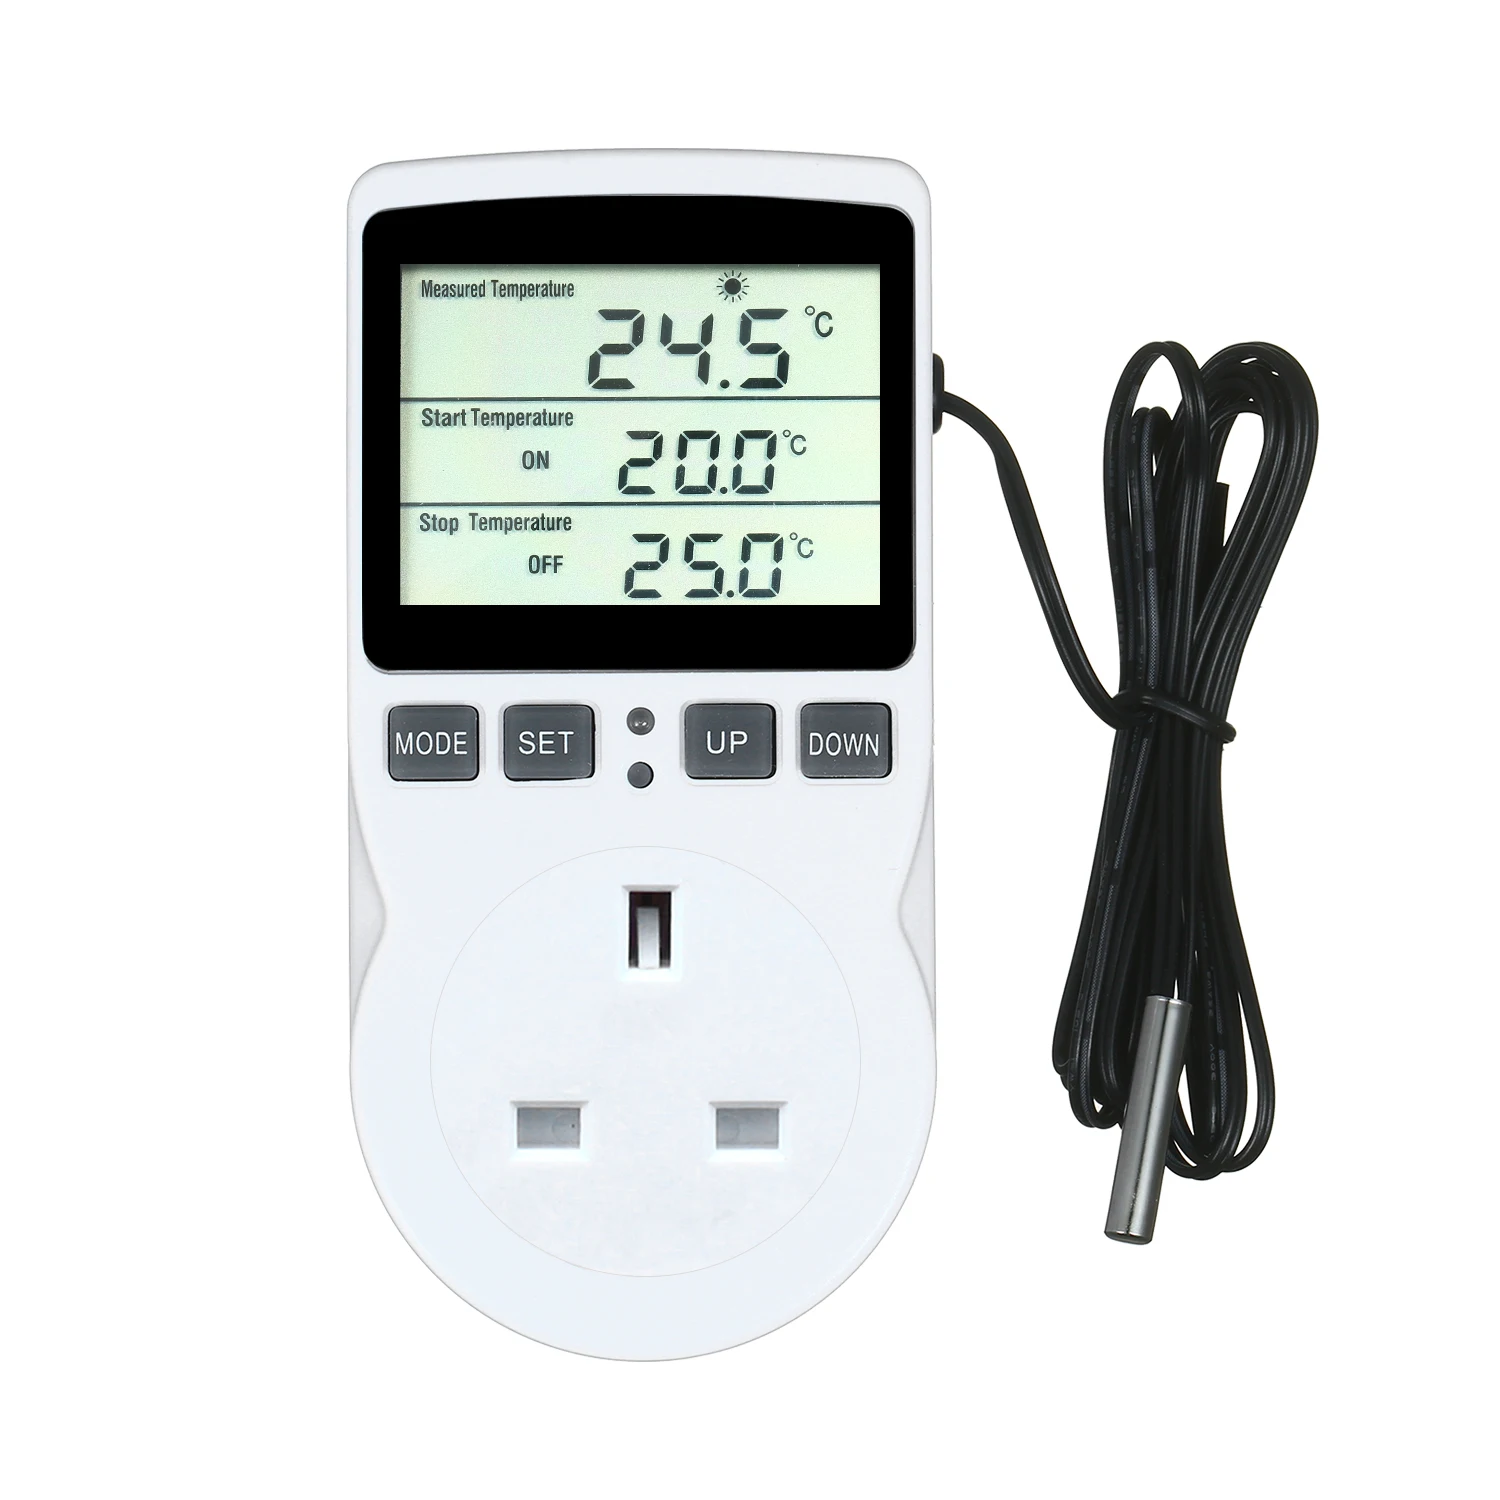 

Digital Thermostat Controller for Terrarium Aquarium Reptiles with Timer and Probe for Greenhouse Seed Germination Refrigerator